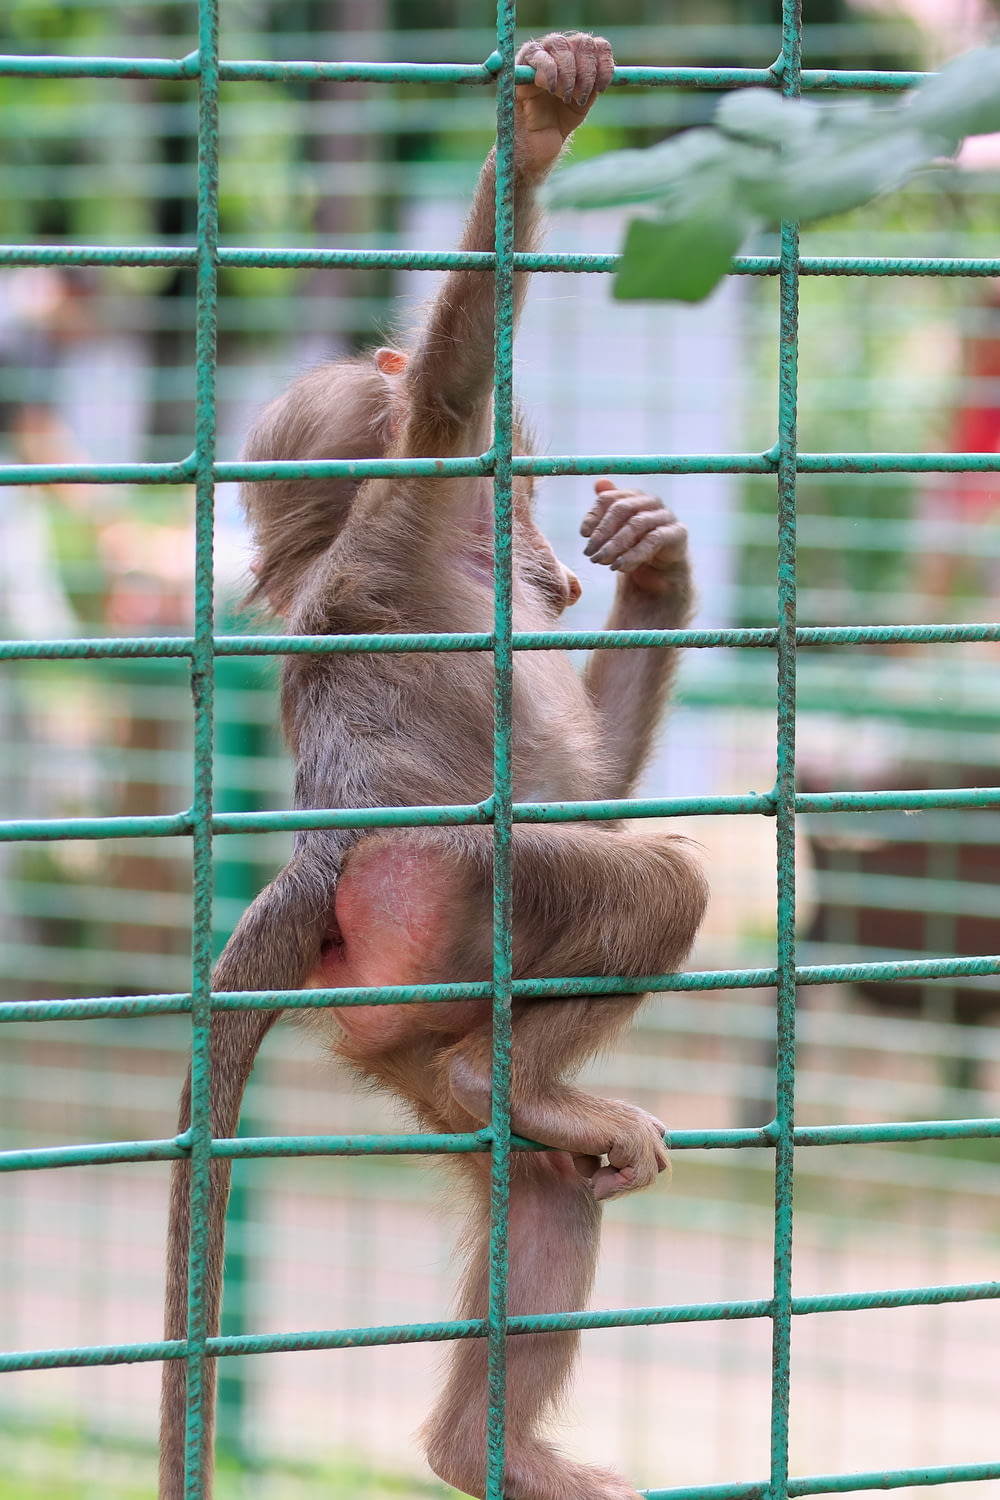 a baby monkey climbing up a green fence